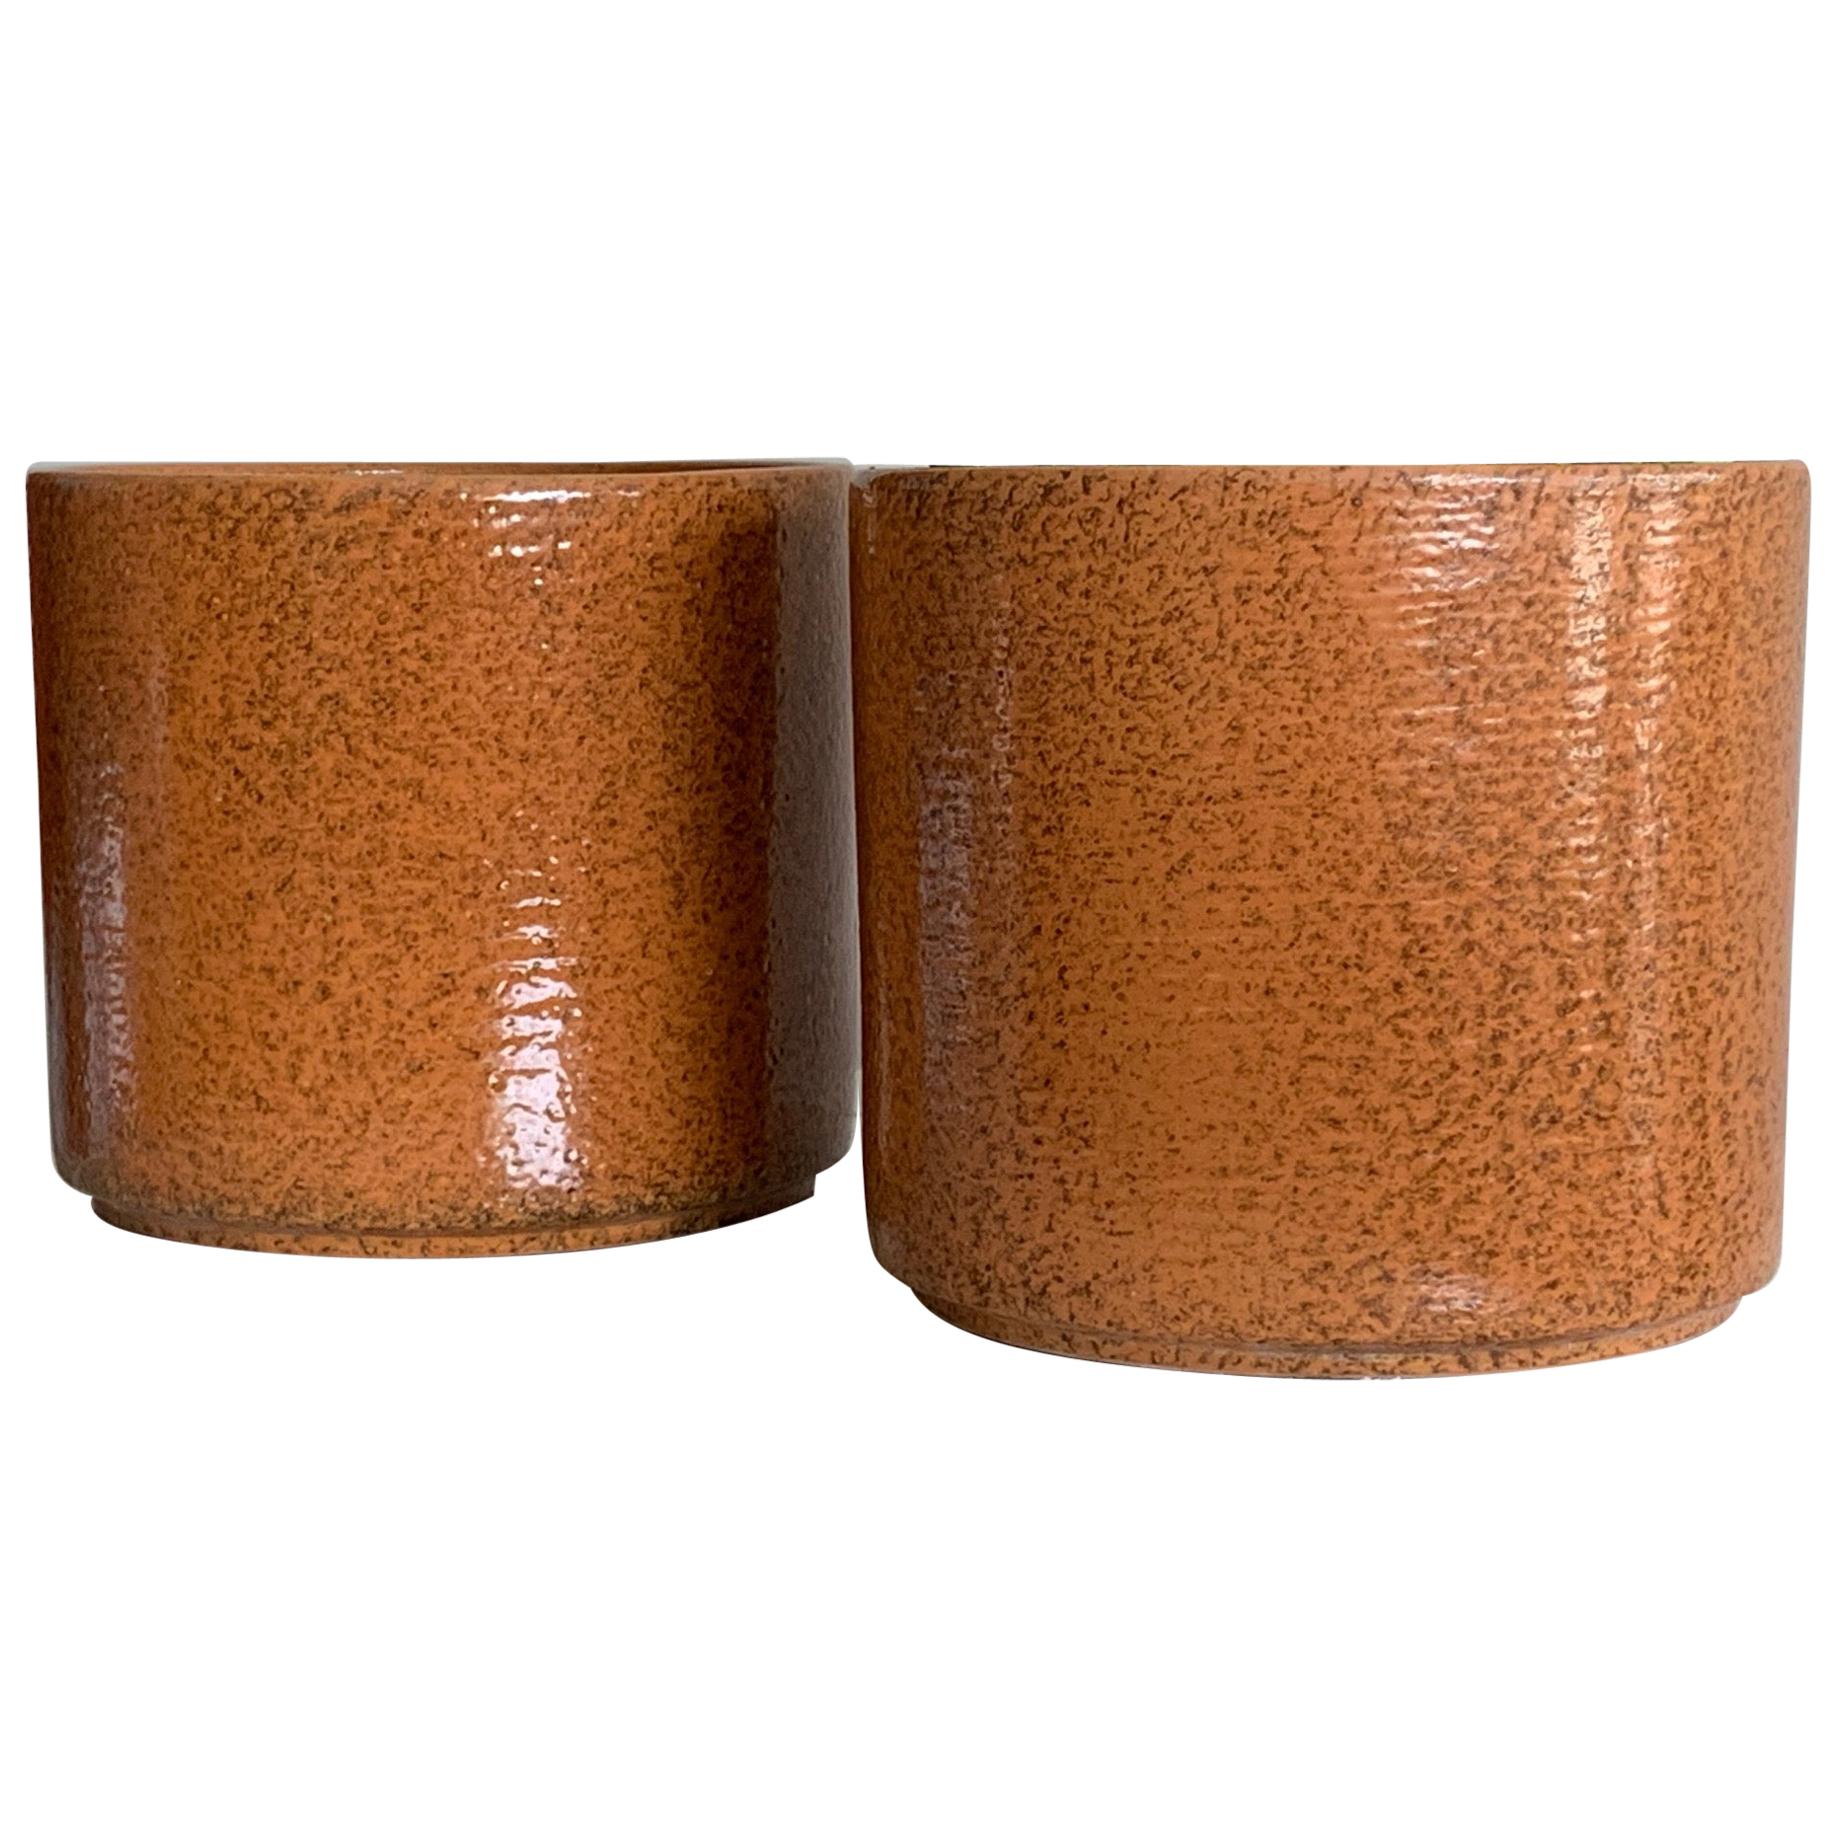 Great Pair of Midcentury Planters by Gainey Pottery